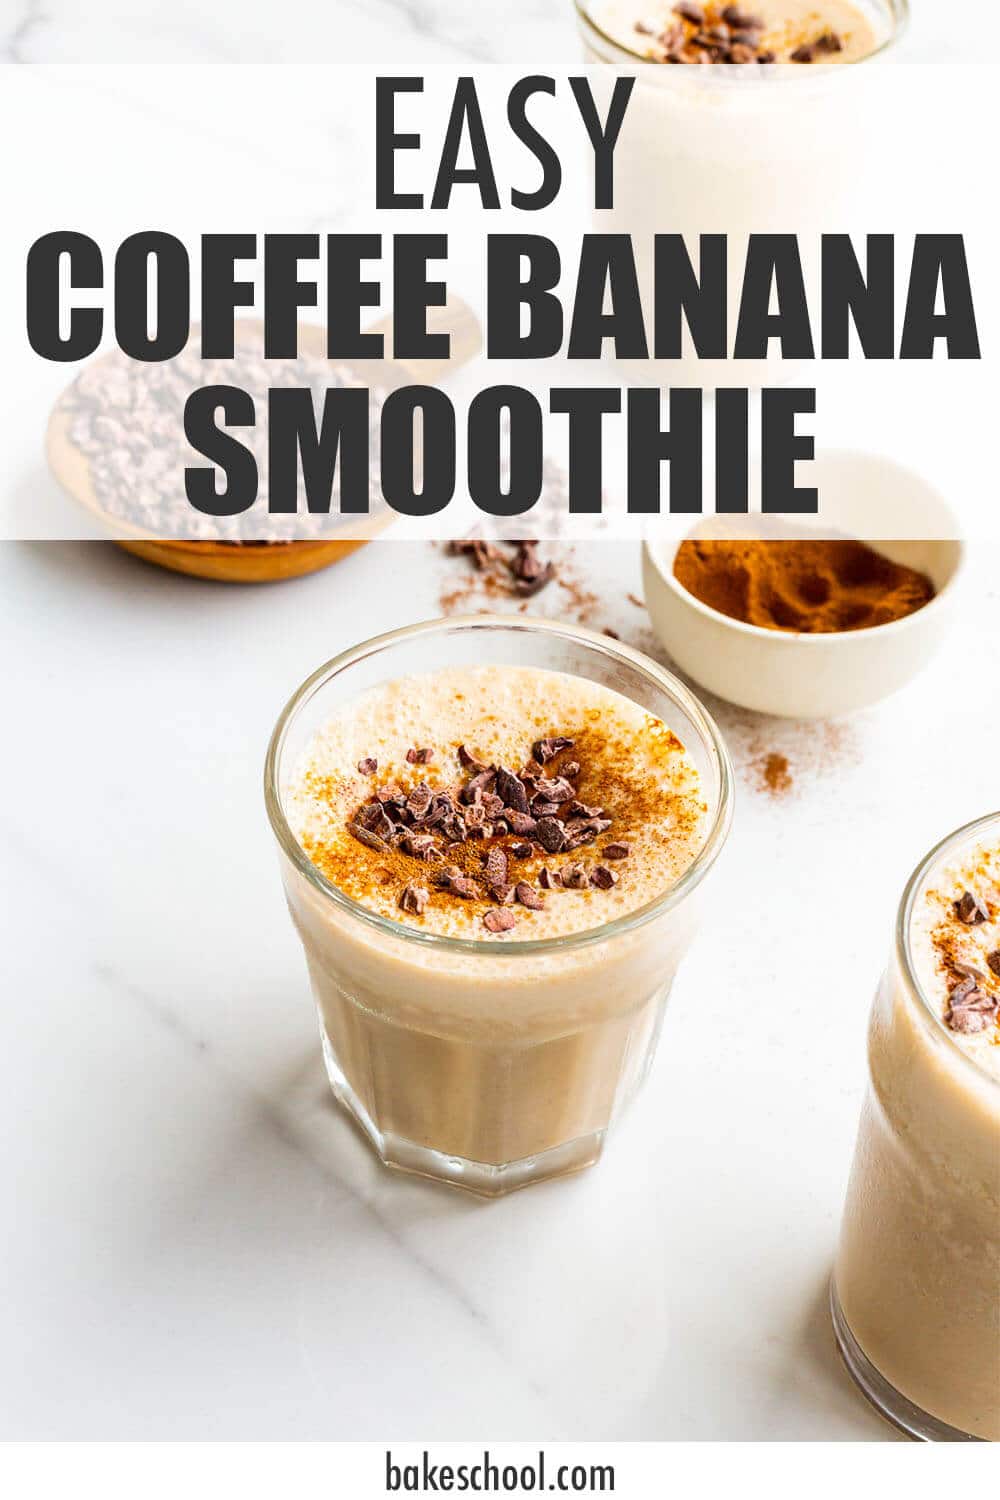 Glasses of coffee banana smoothie garnished with cocoa nibs and espresso powder.